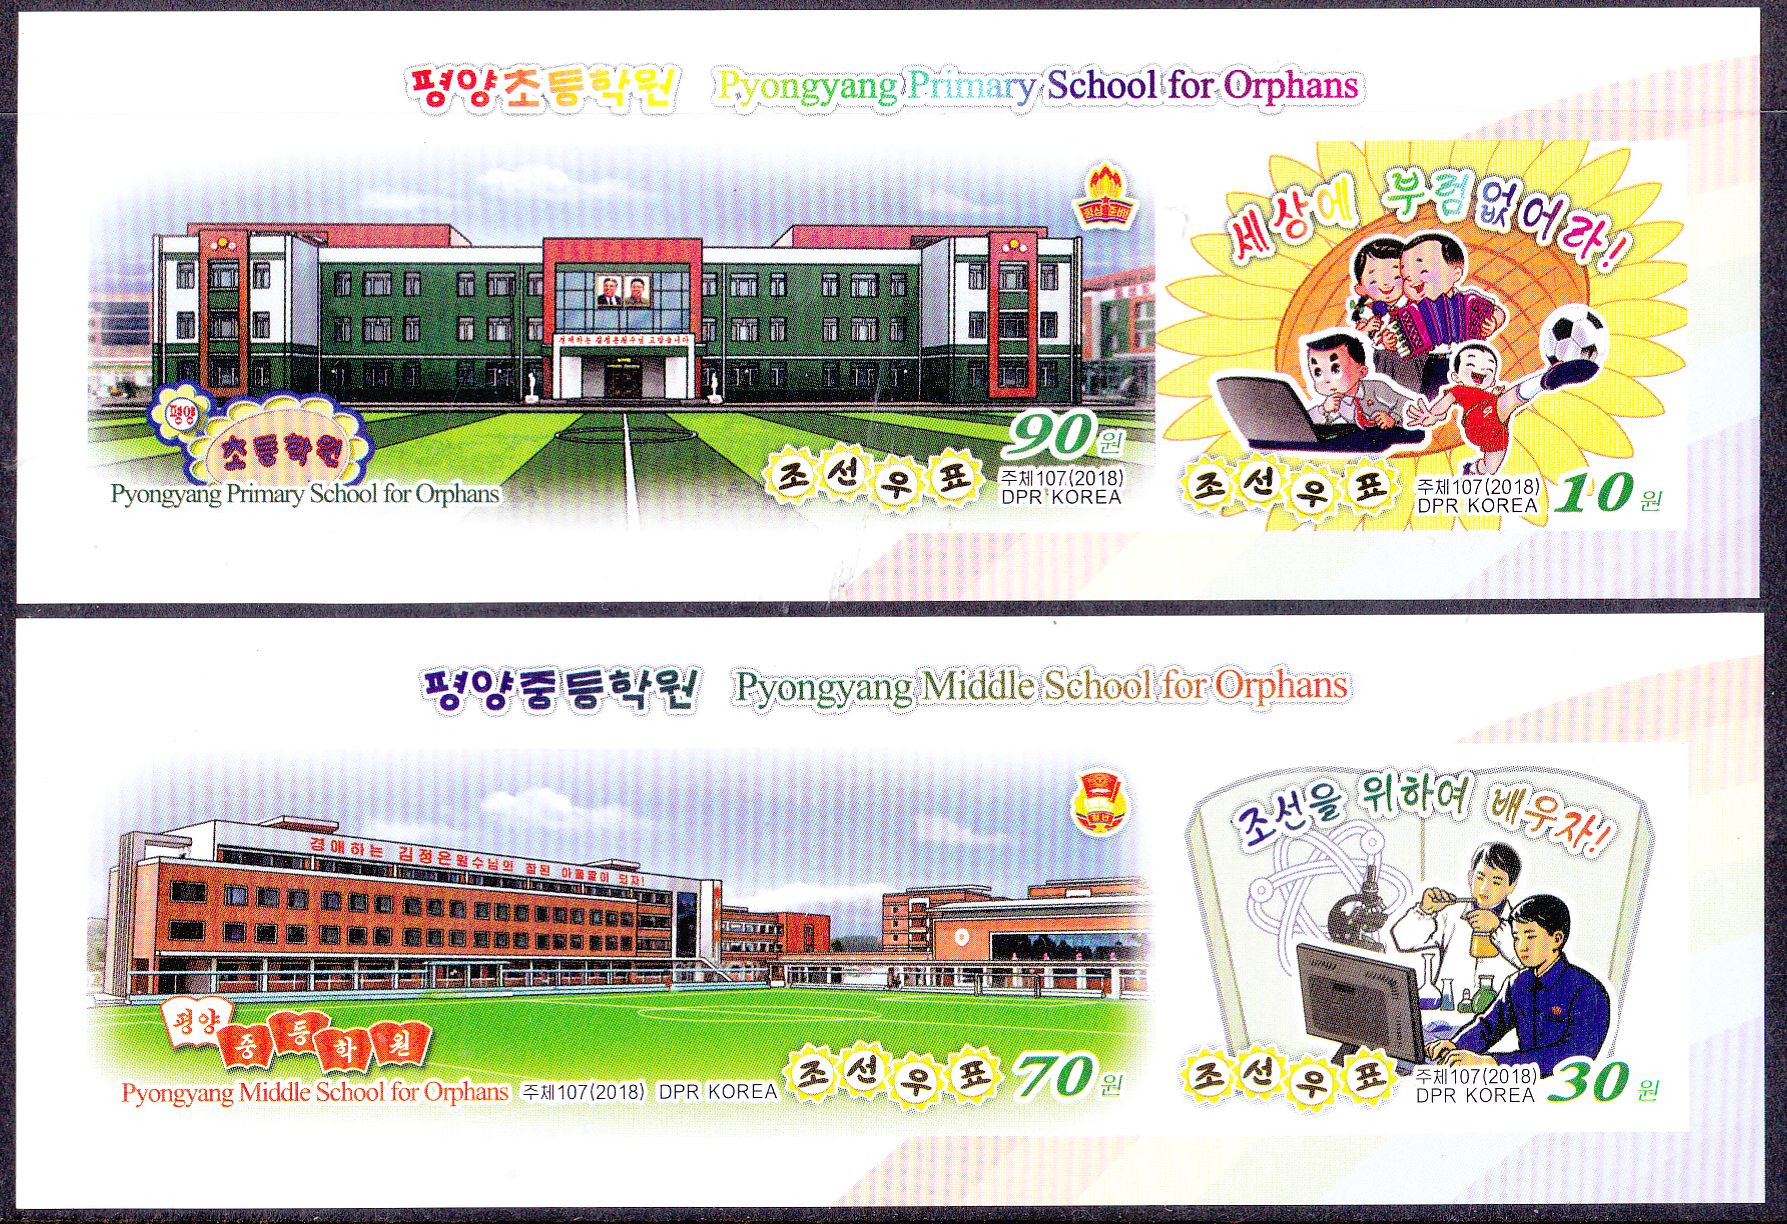 L4668, Korea "Pyongyang School for Orphans", 2 Pcs SS Stamps, 2018 Imperforate